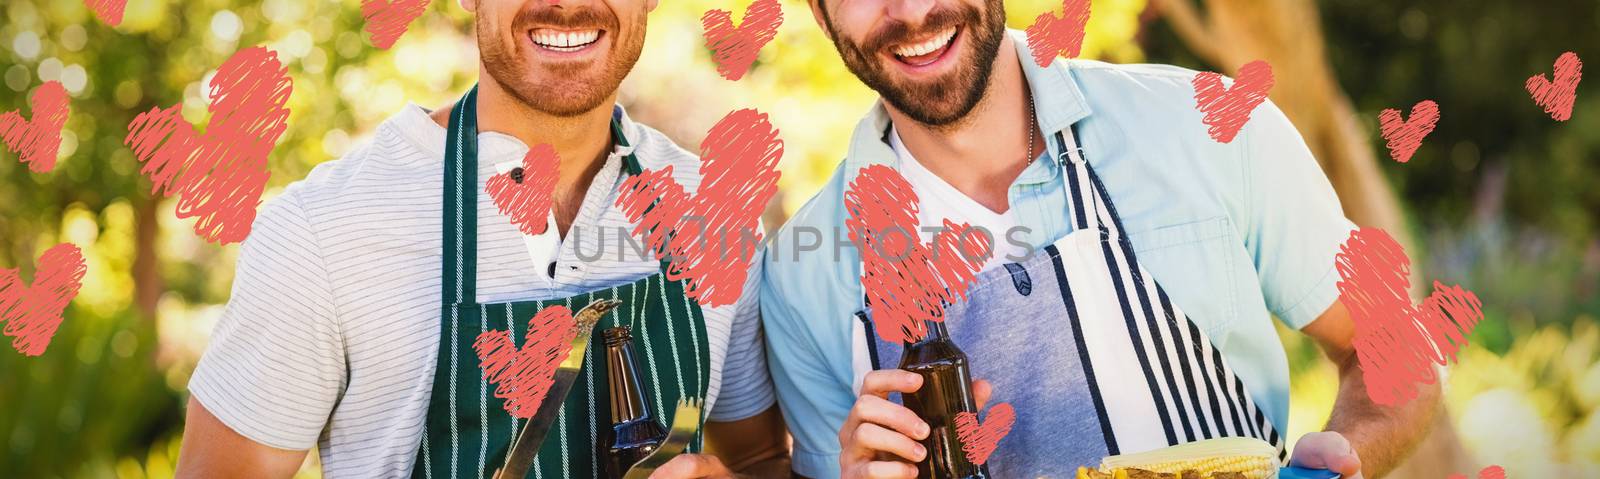 Red Hearts against portrait of two happy men holding barbecue meal and beer bottle